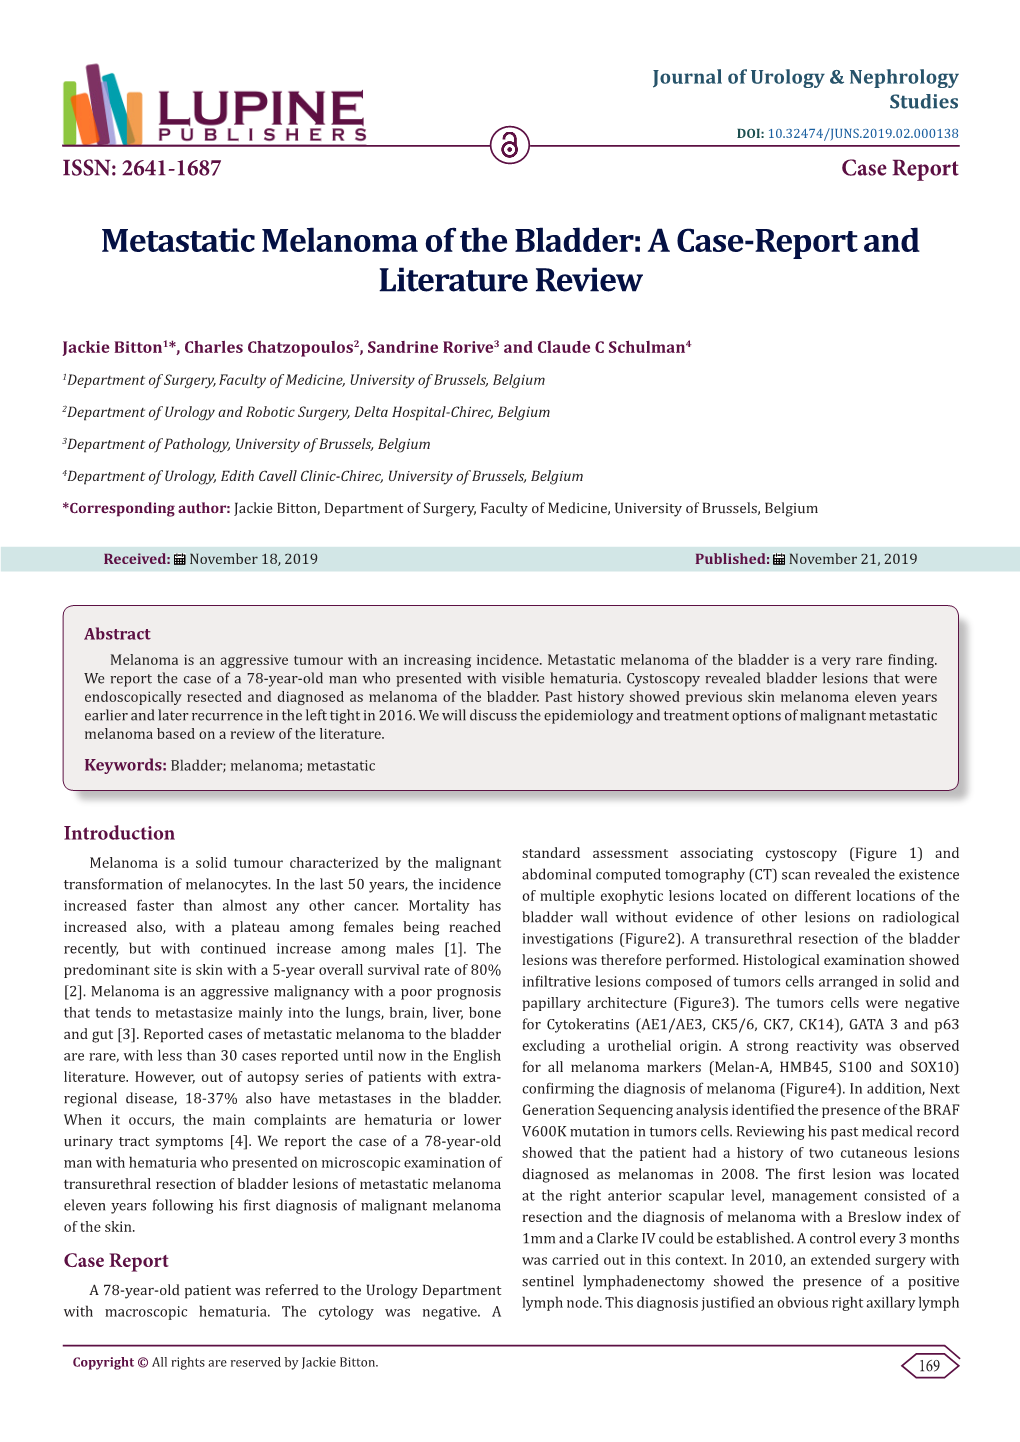 Metastatic Melanoma of the Bladder: a Case-Report and Literature Review